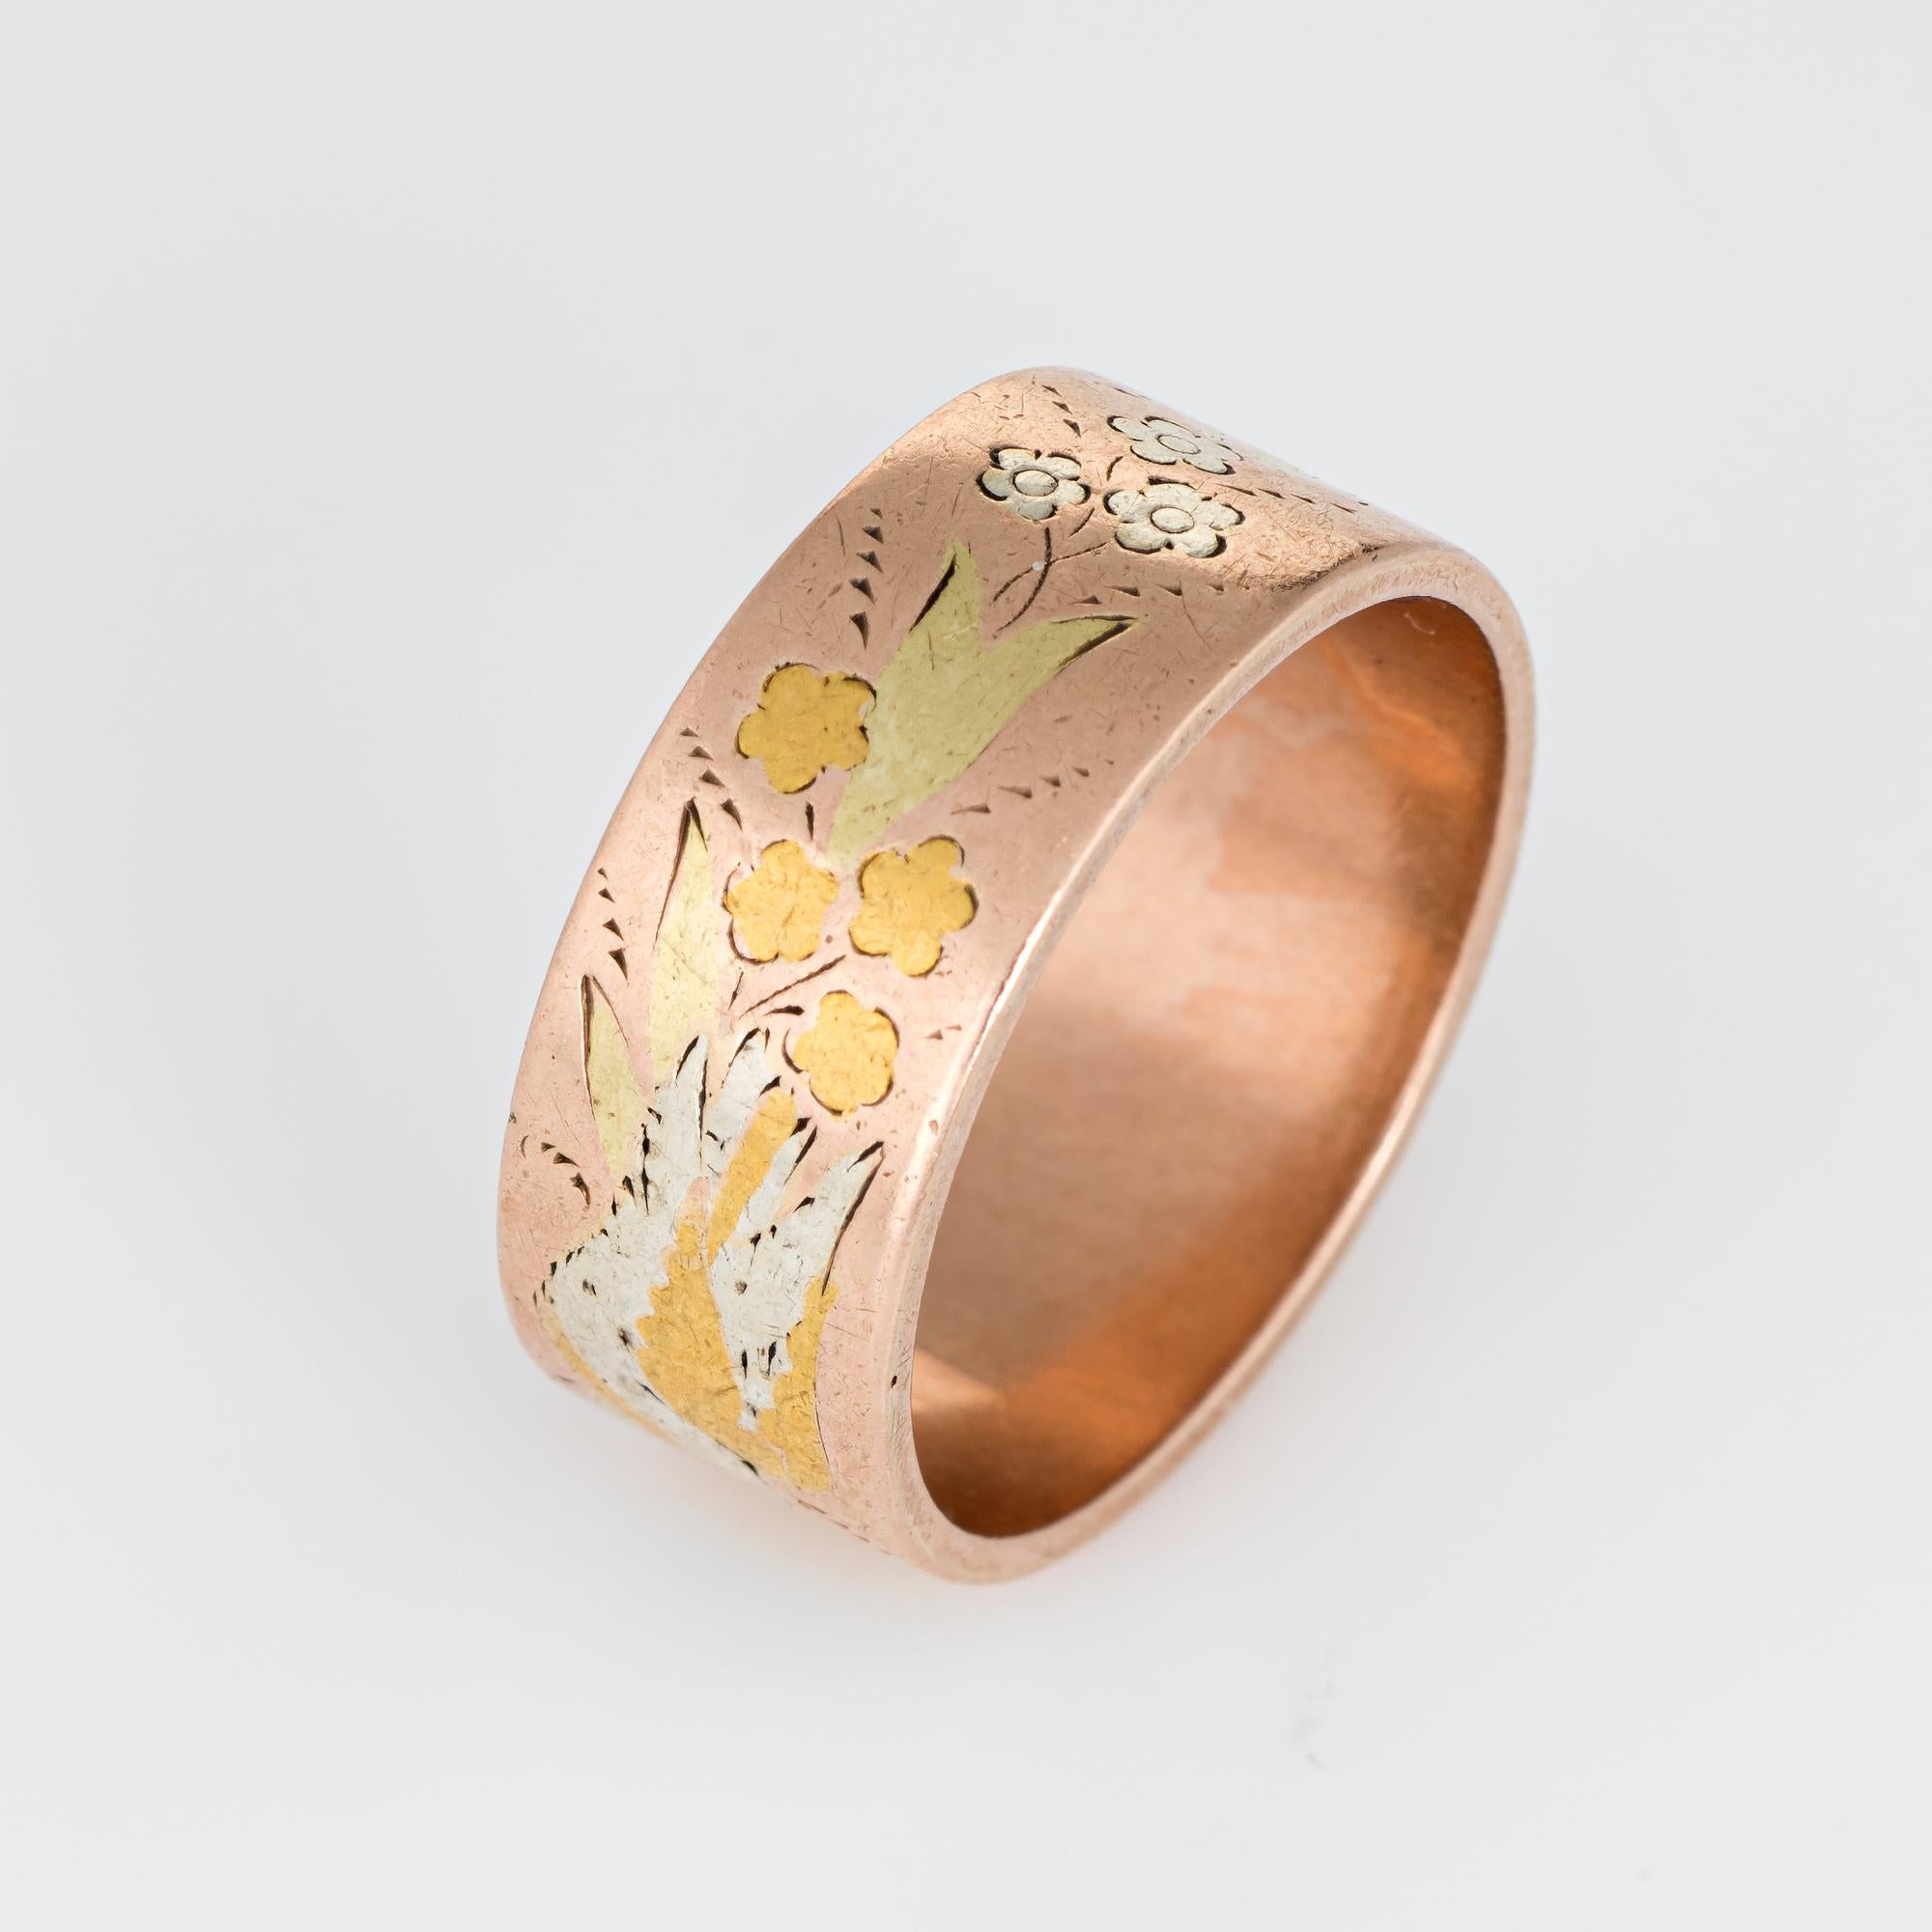 Elegant antique Victorian wedding band (circa 1880s to 1900s) crafted in tow-tone 14k rose & yellow gold. 

The band features a pattern of flowers and leaves with two white doves rendered in silver. The ring epitomizes vintage charm and would make a